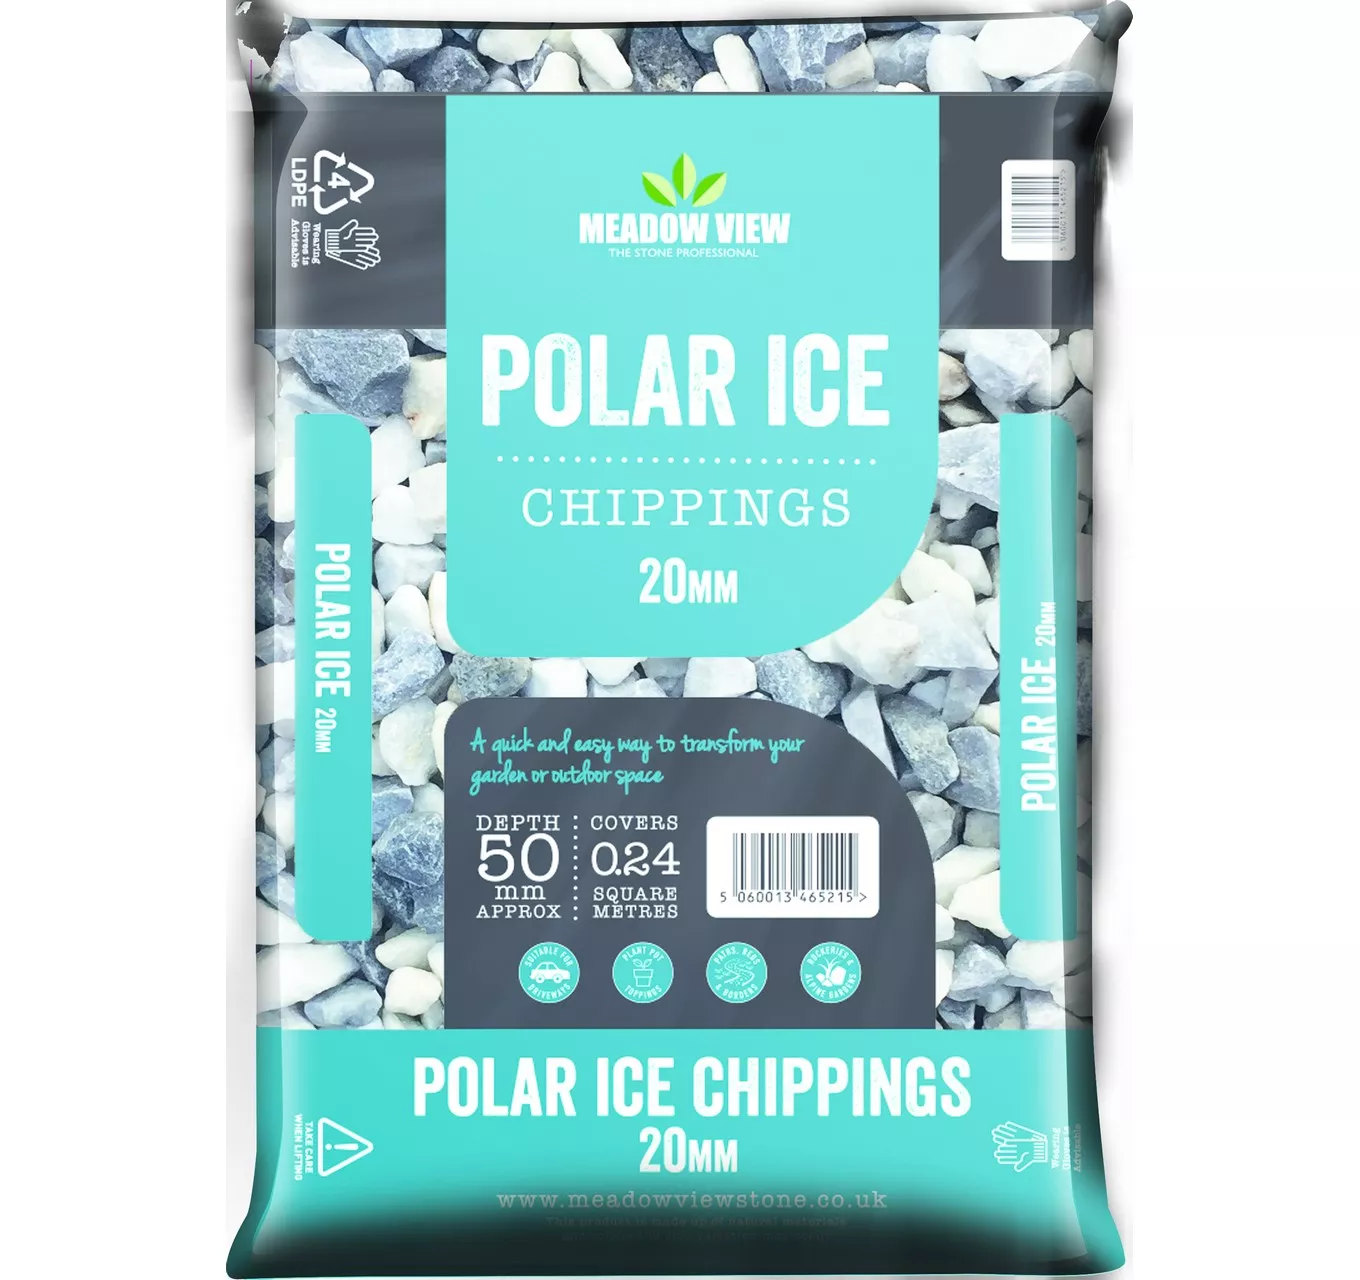 Polar Ice Chippings 20mm 20kg